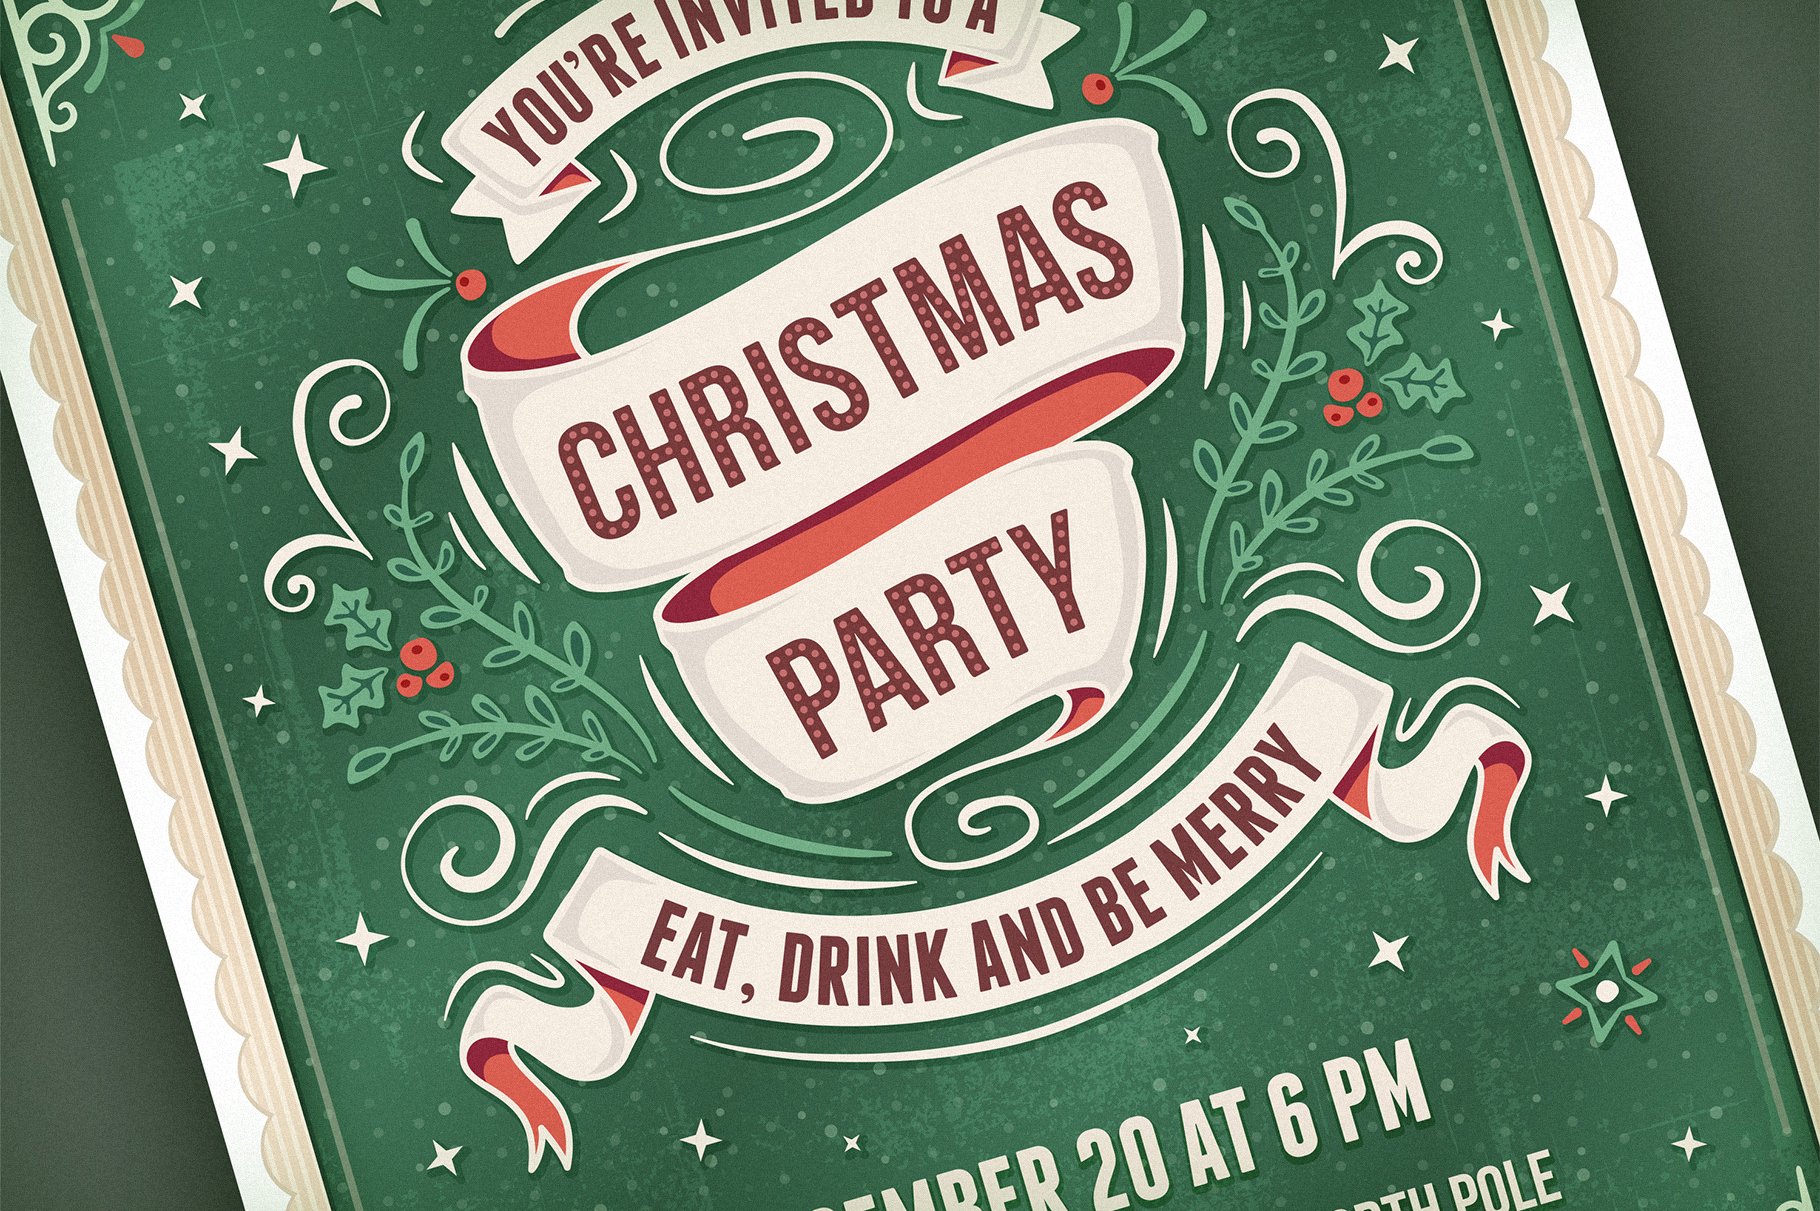 Christmas Party Invitation cover image.